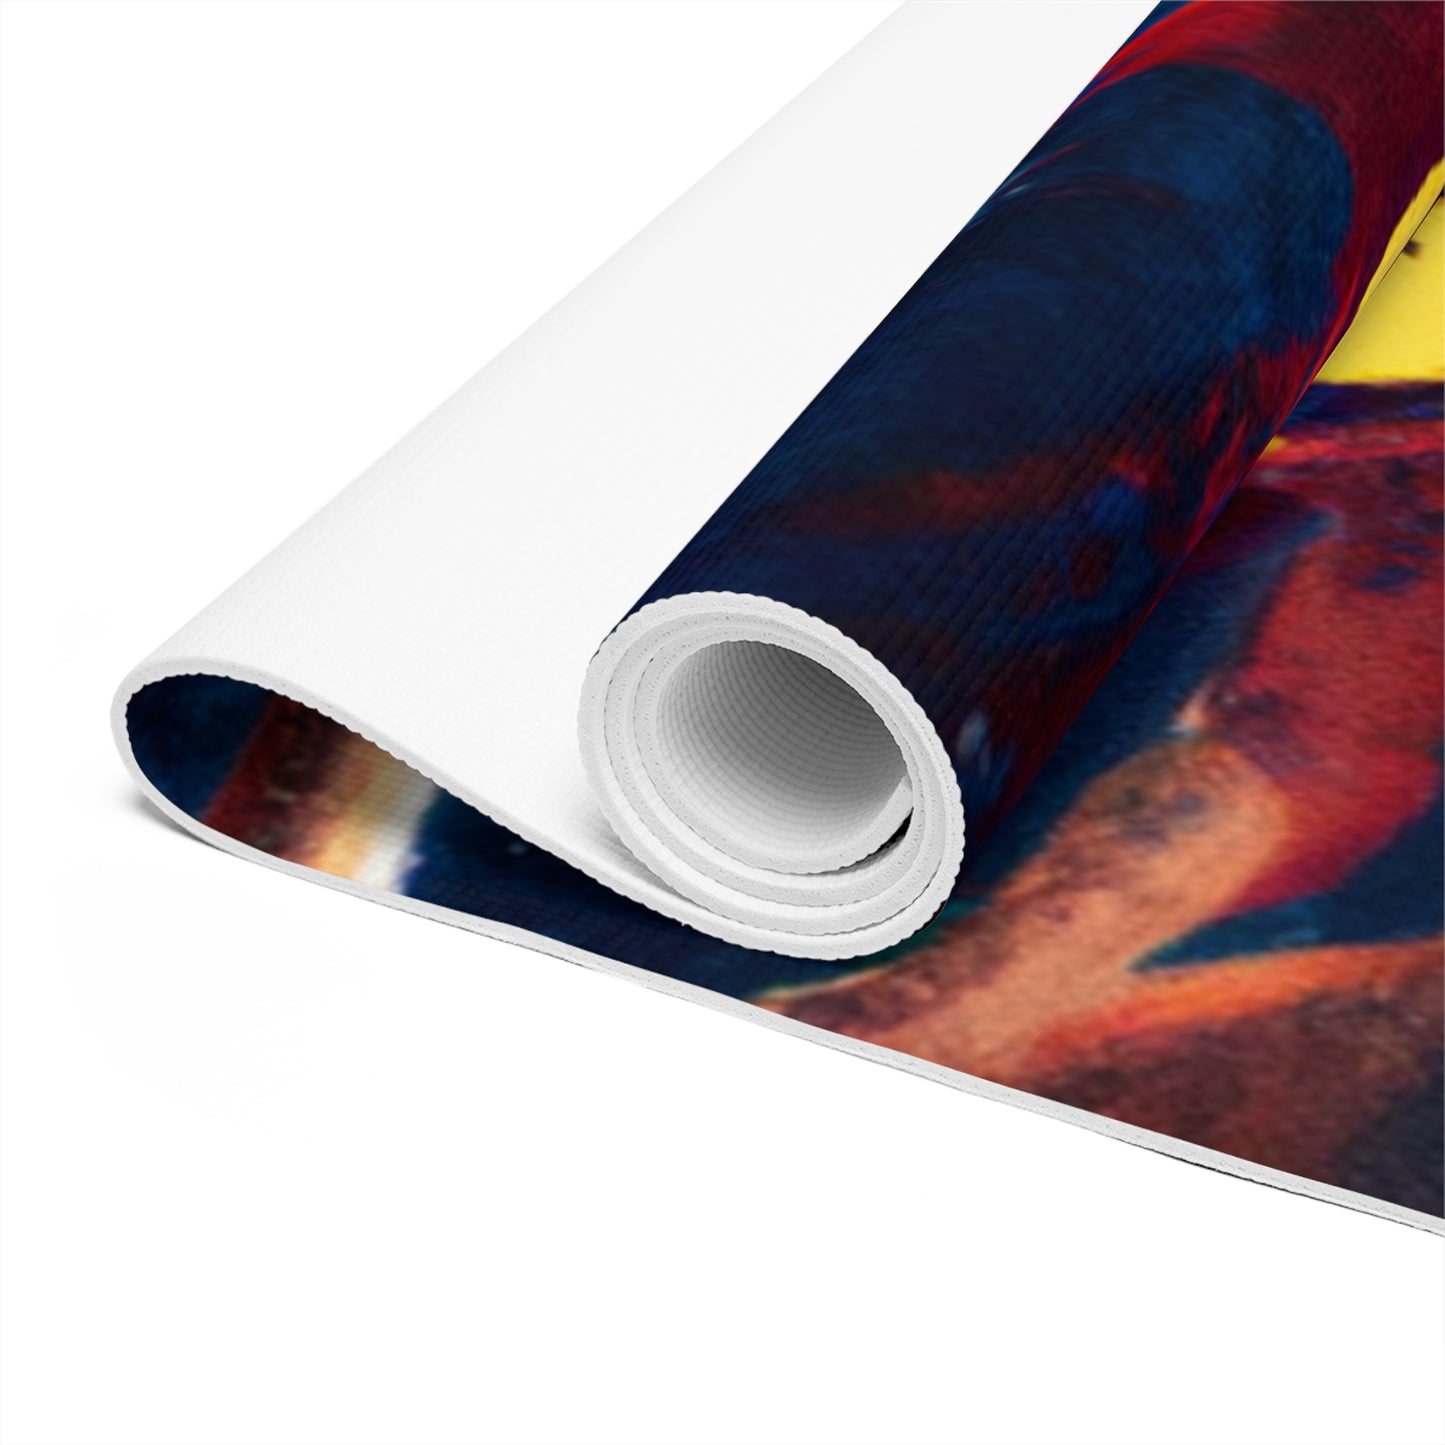 "Athletic Grit: Capturing the Power of the Moment" - Go Plus Foam Yoga Mat